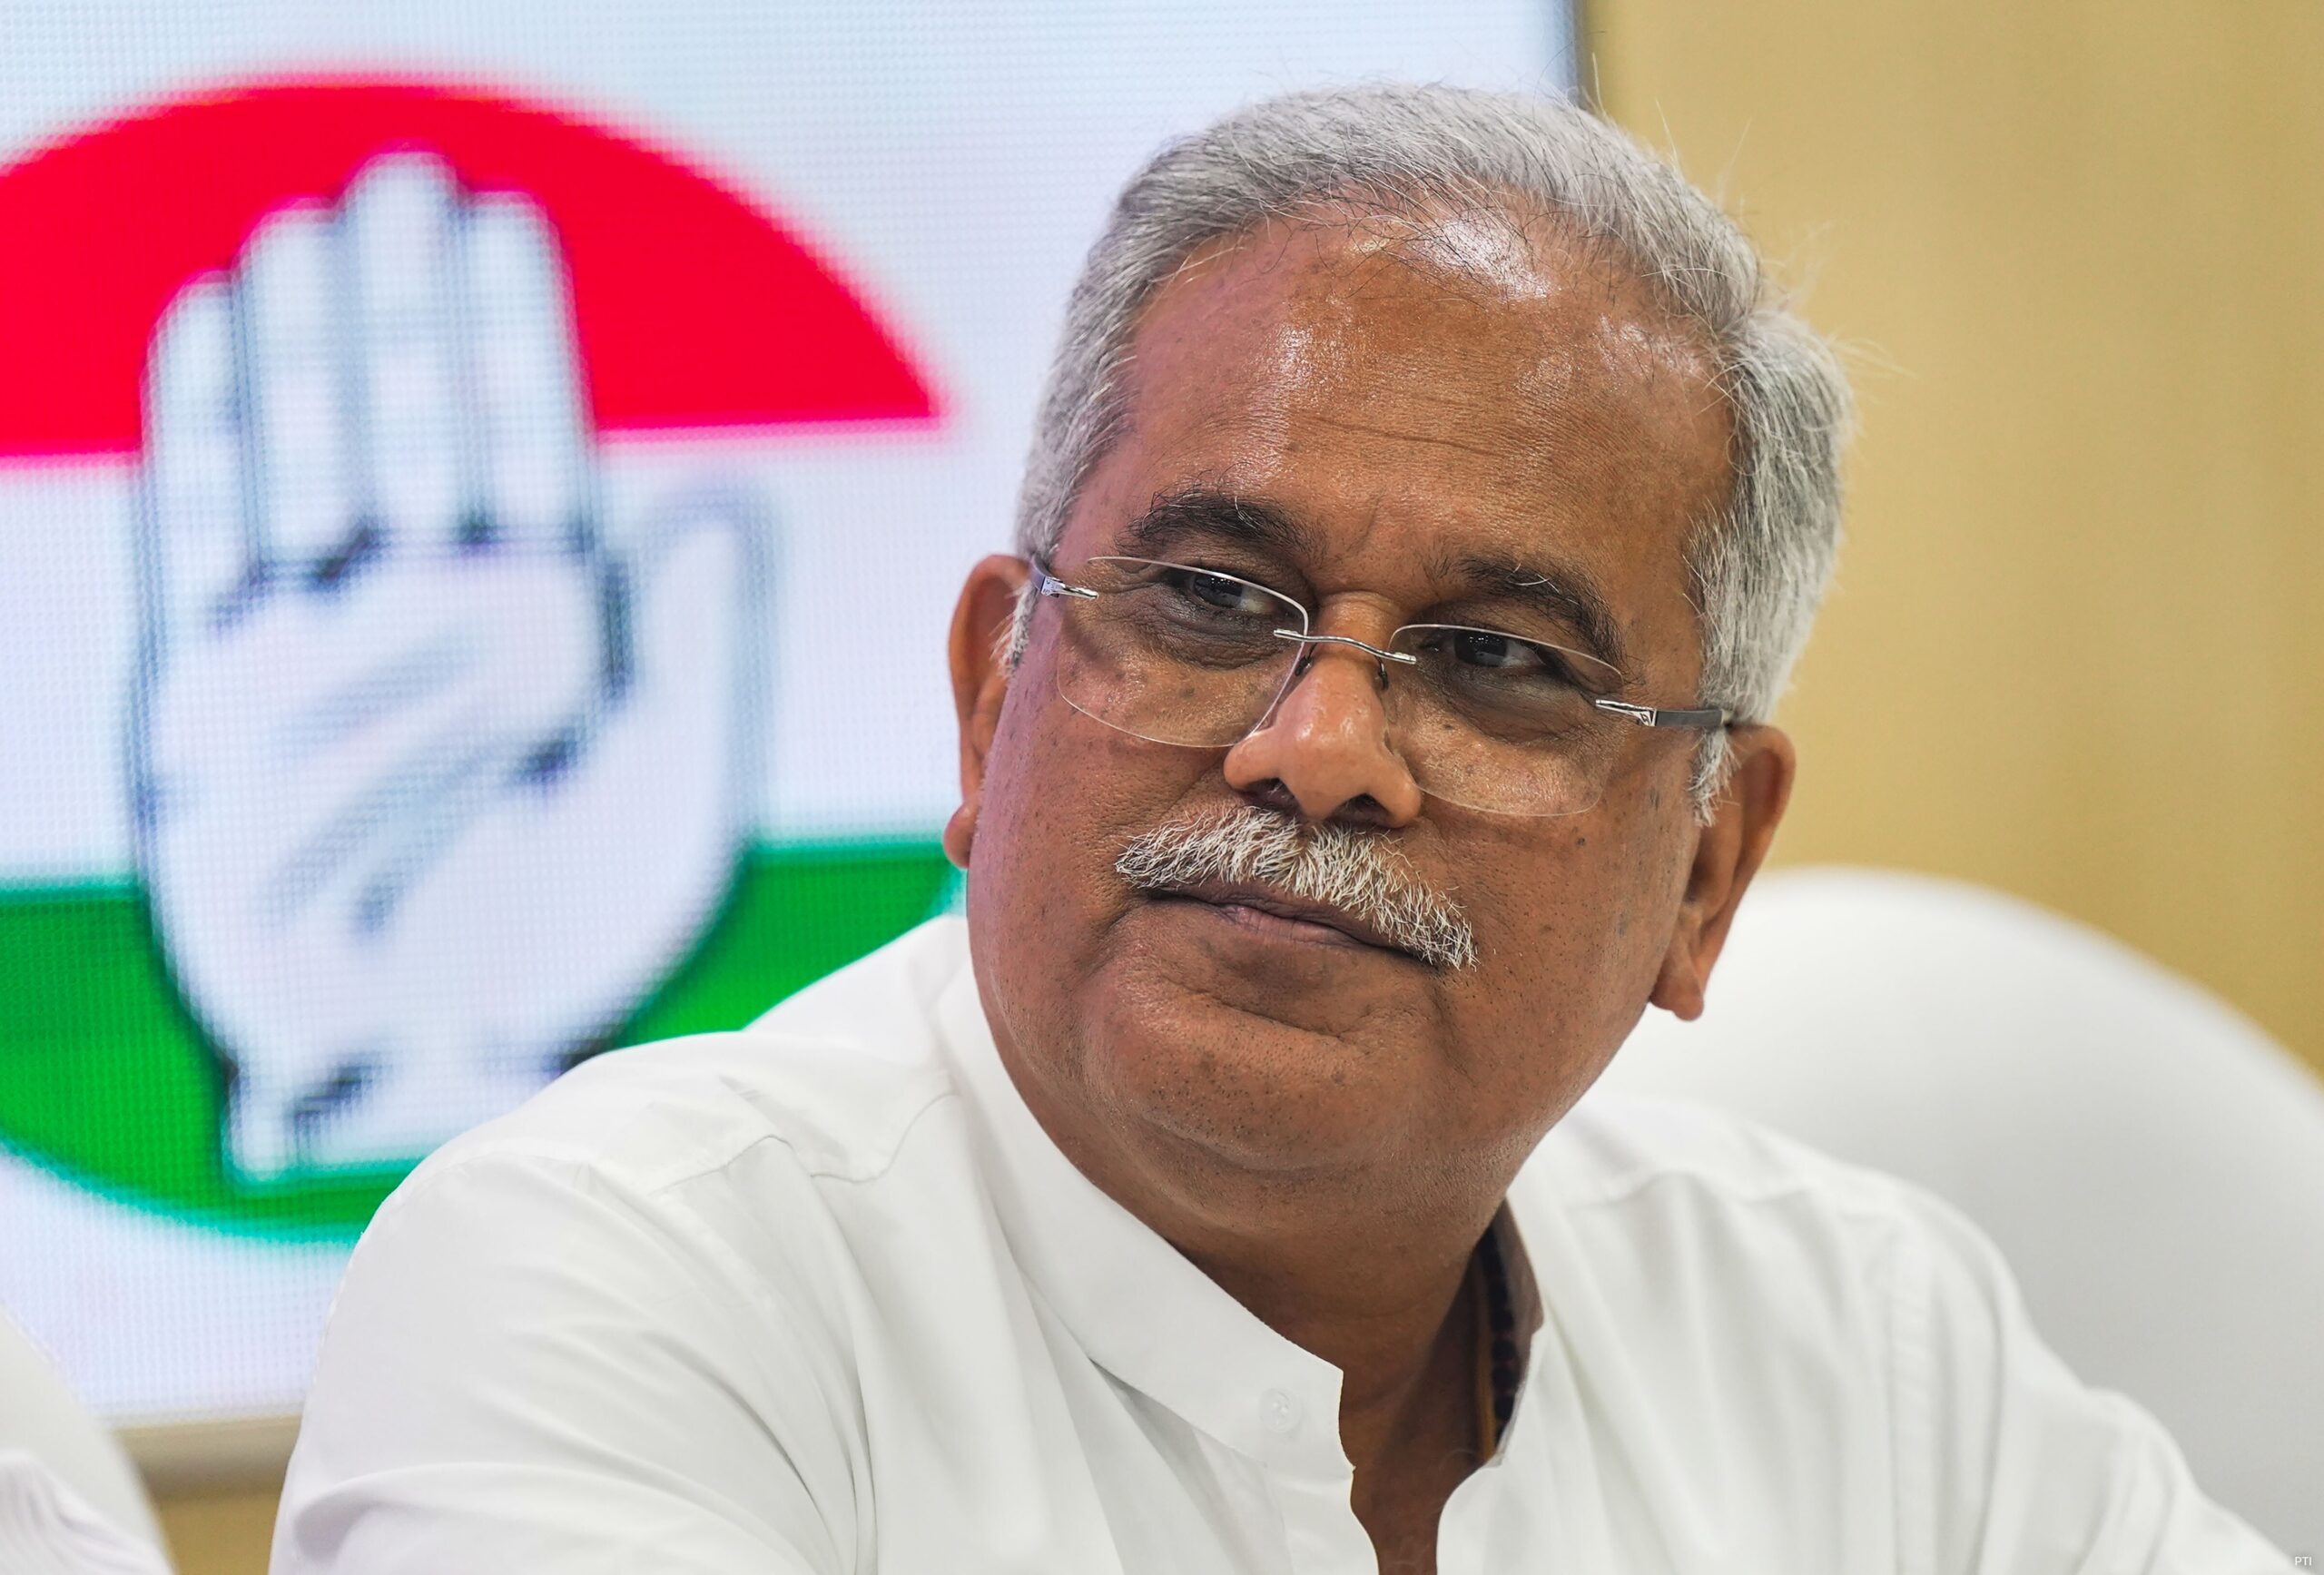 Get NIA To Probe: Bhupesh Baghel After BJP’s “Targeted Killing” Allegation